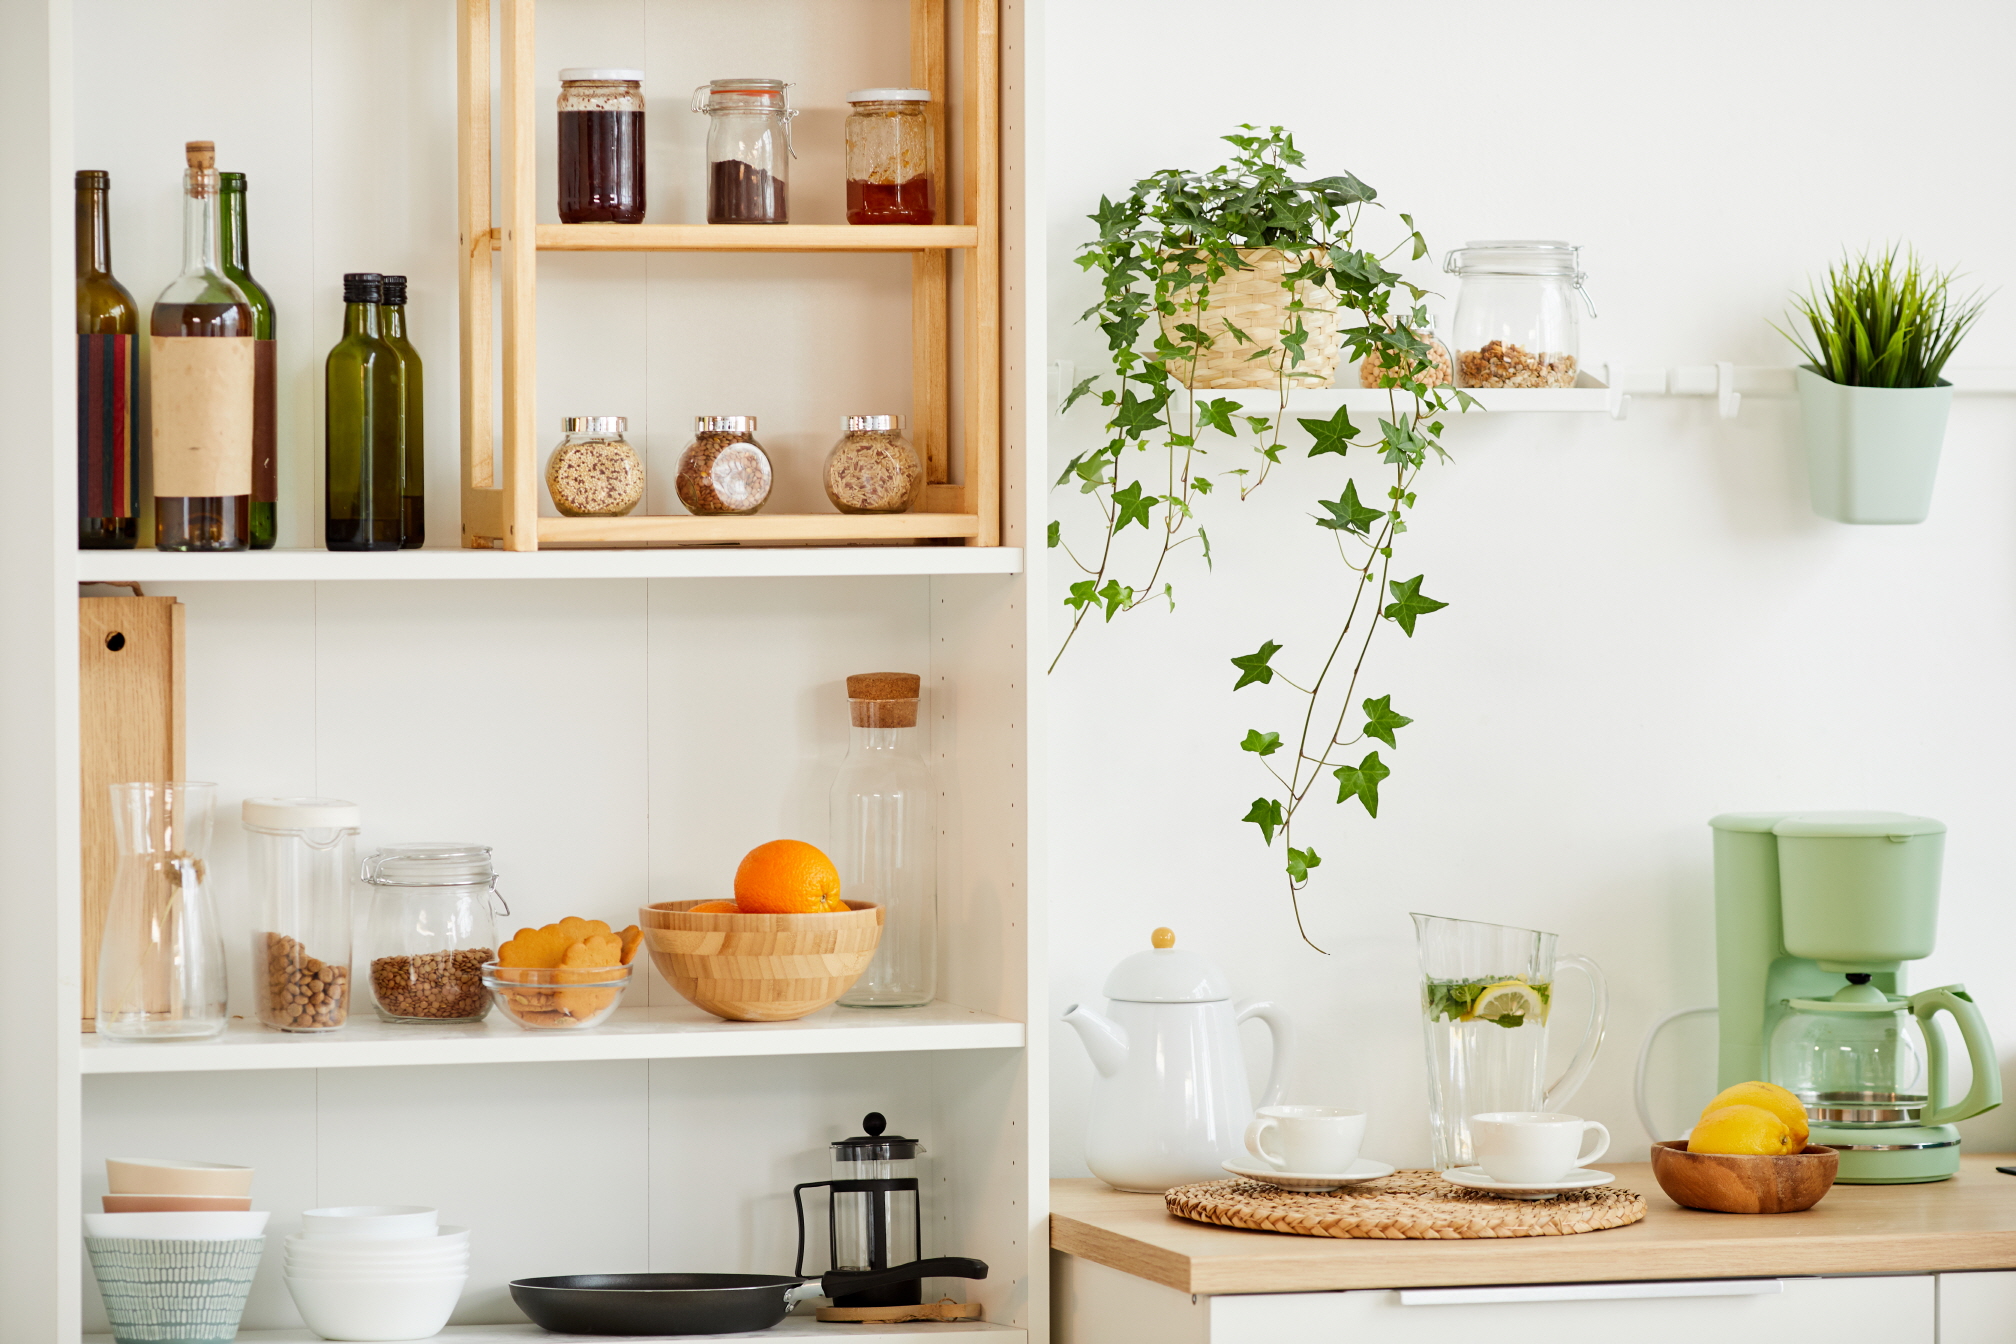 open shelves offer practical storage and stylish display, enhancing kitchen space effortlessly.